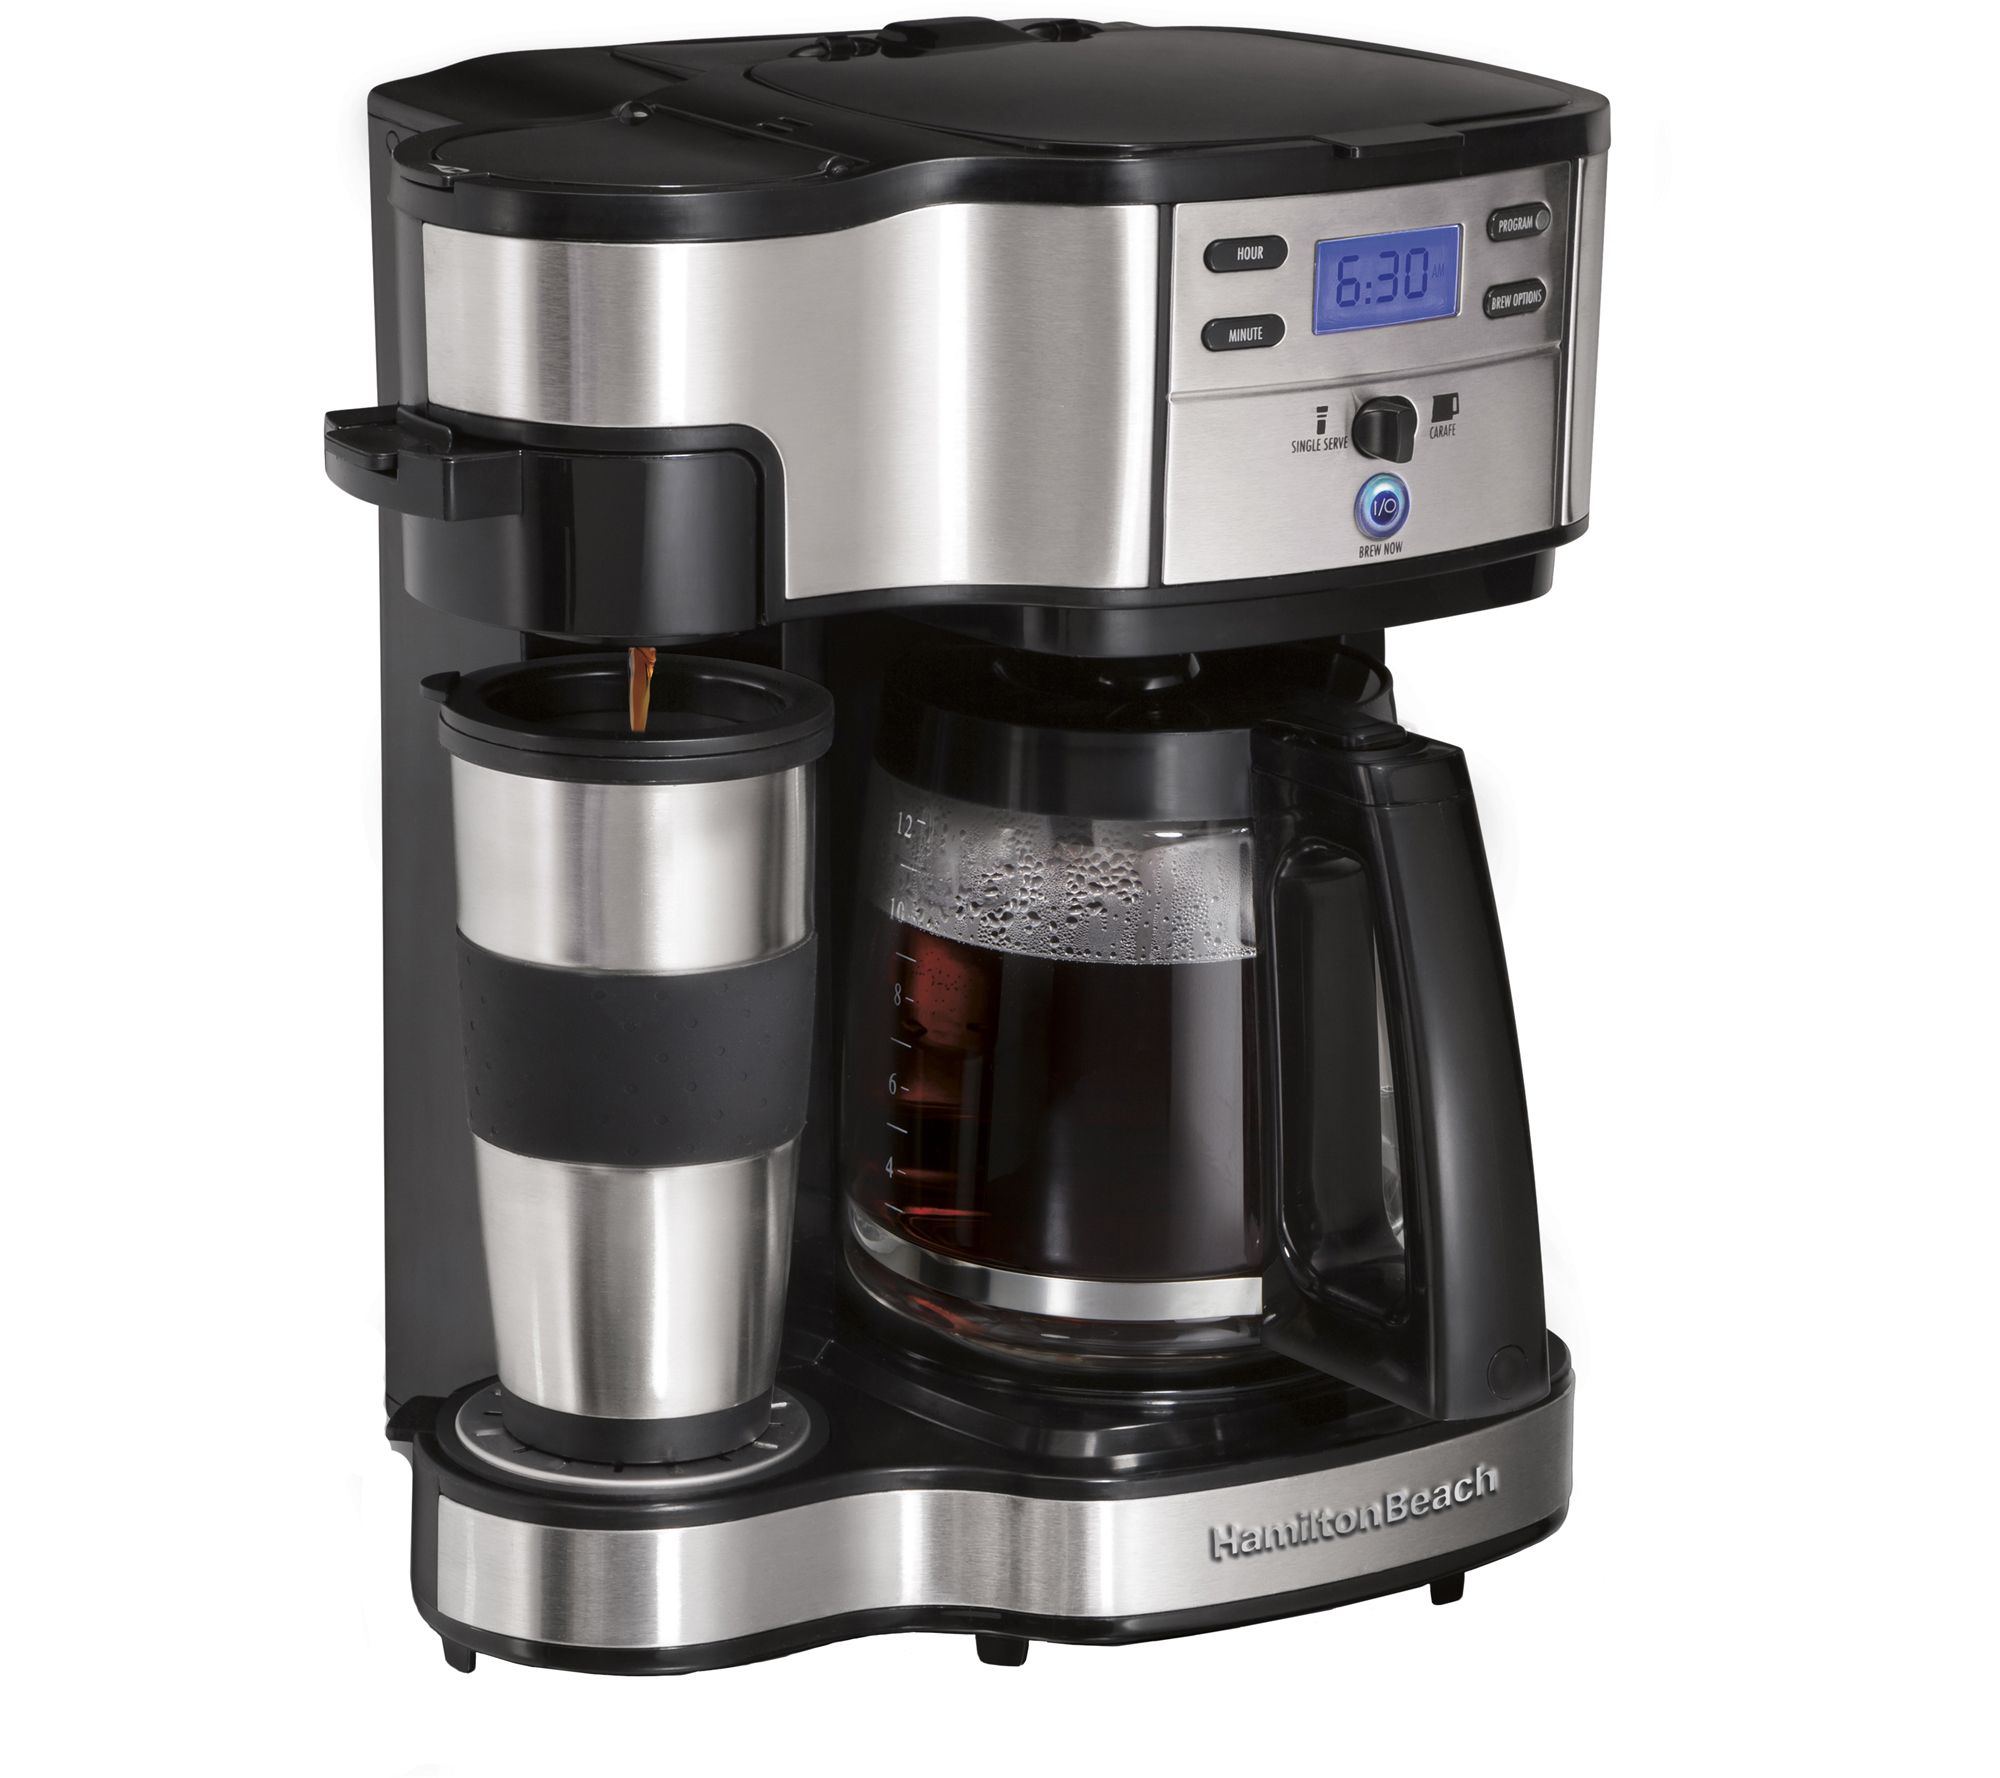 Elite Gourmet Dual Coffee Maker Brewer, Includes Two 16